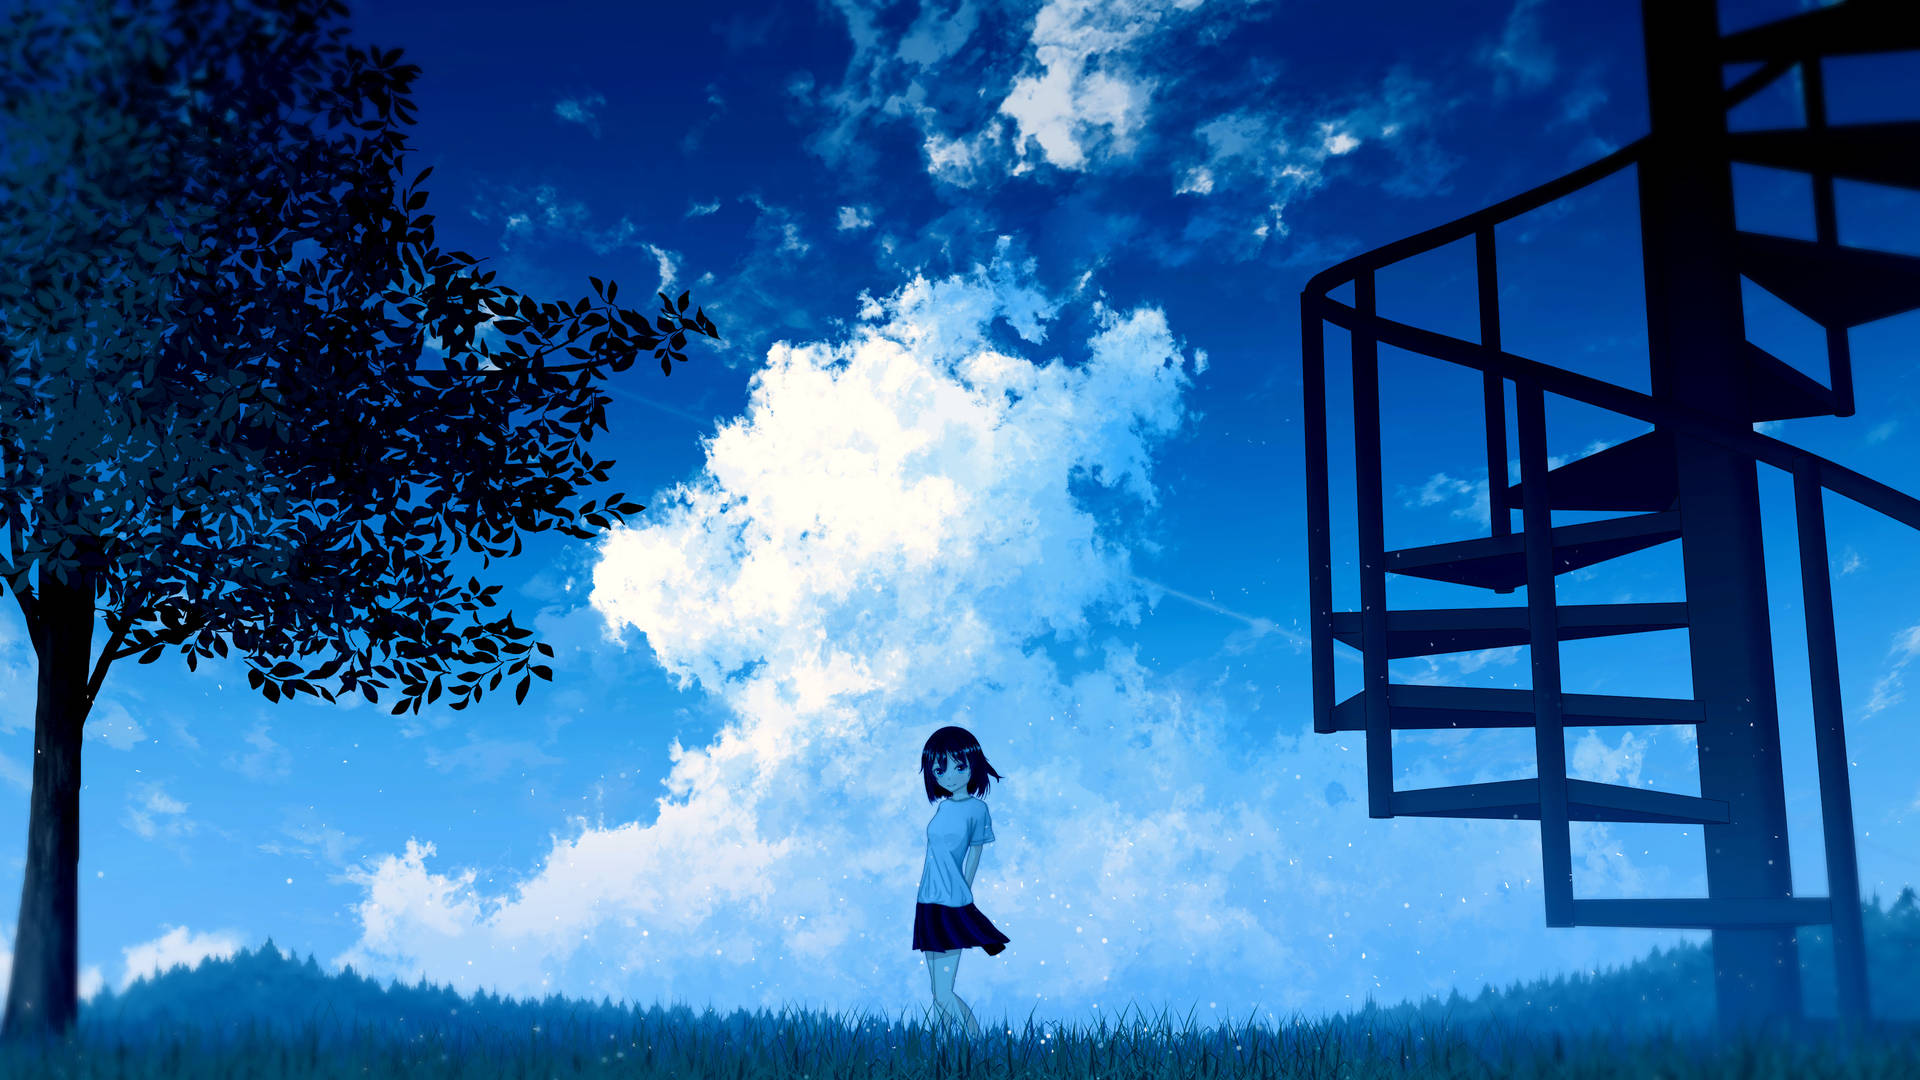 Cloudy Days Animated Girl Wallpaper